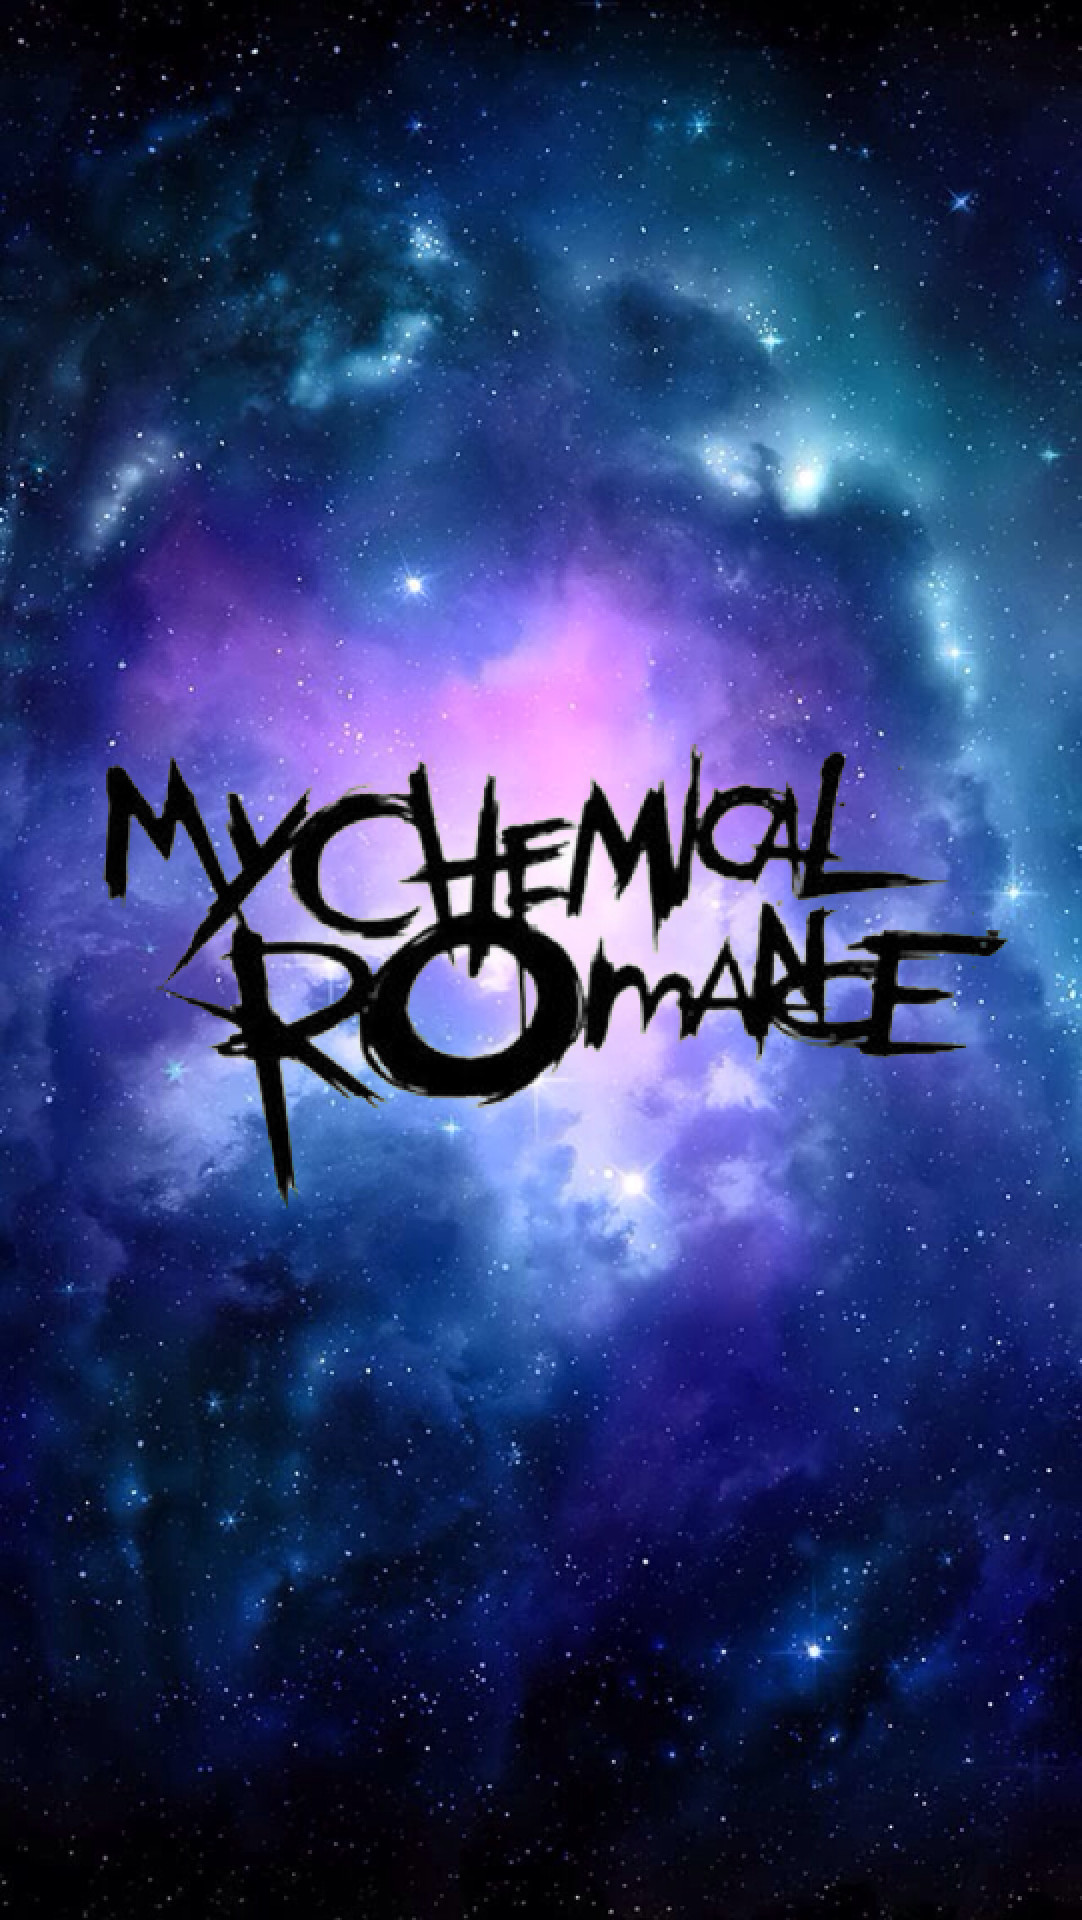 My Chemical Romance Wallpaper For iPhone That I Made